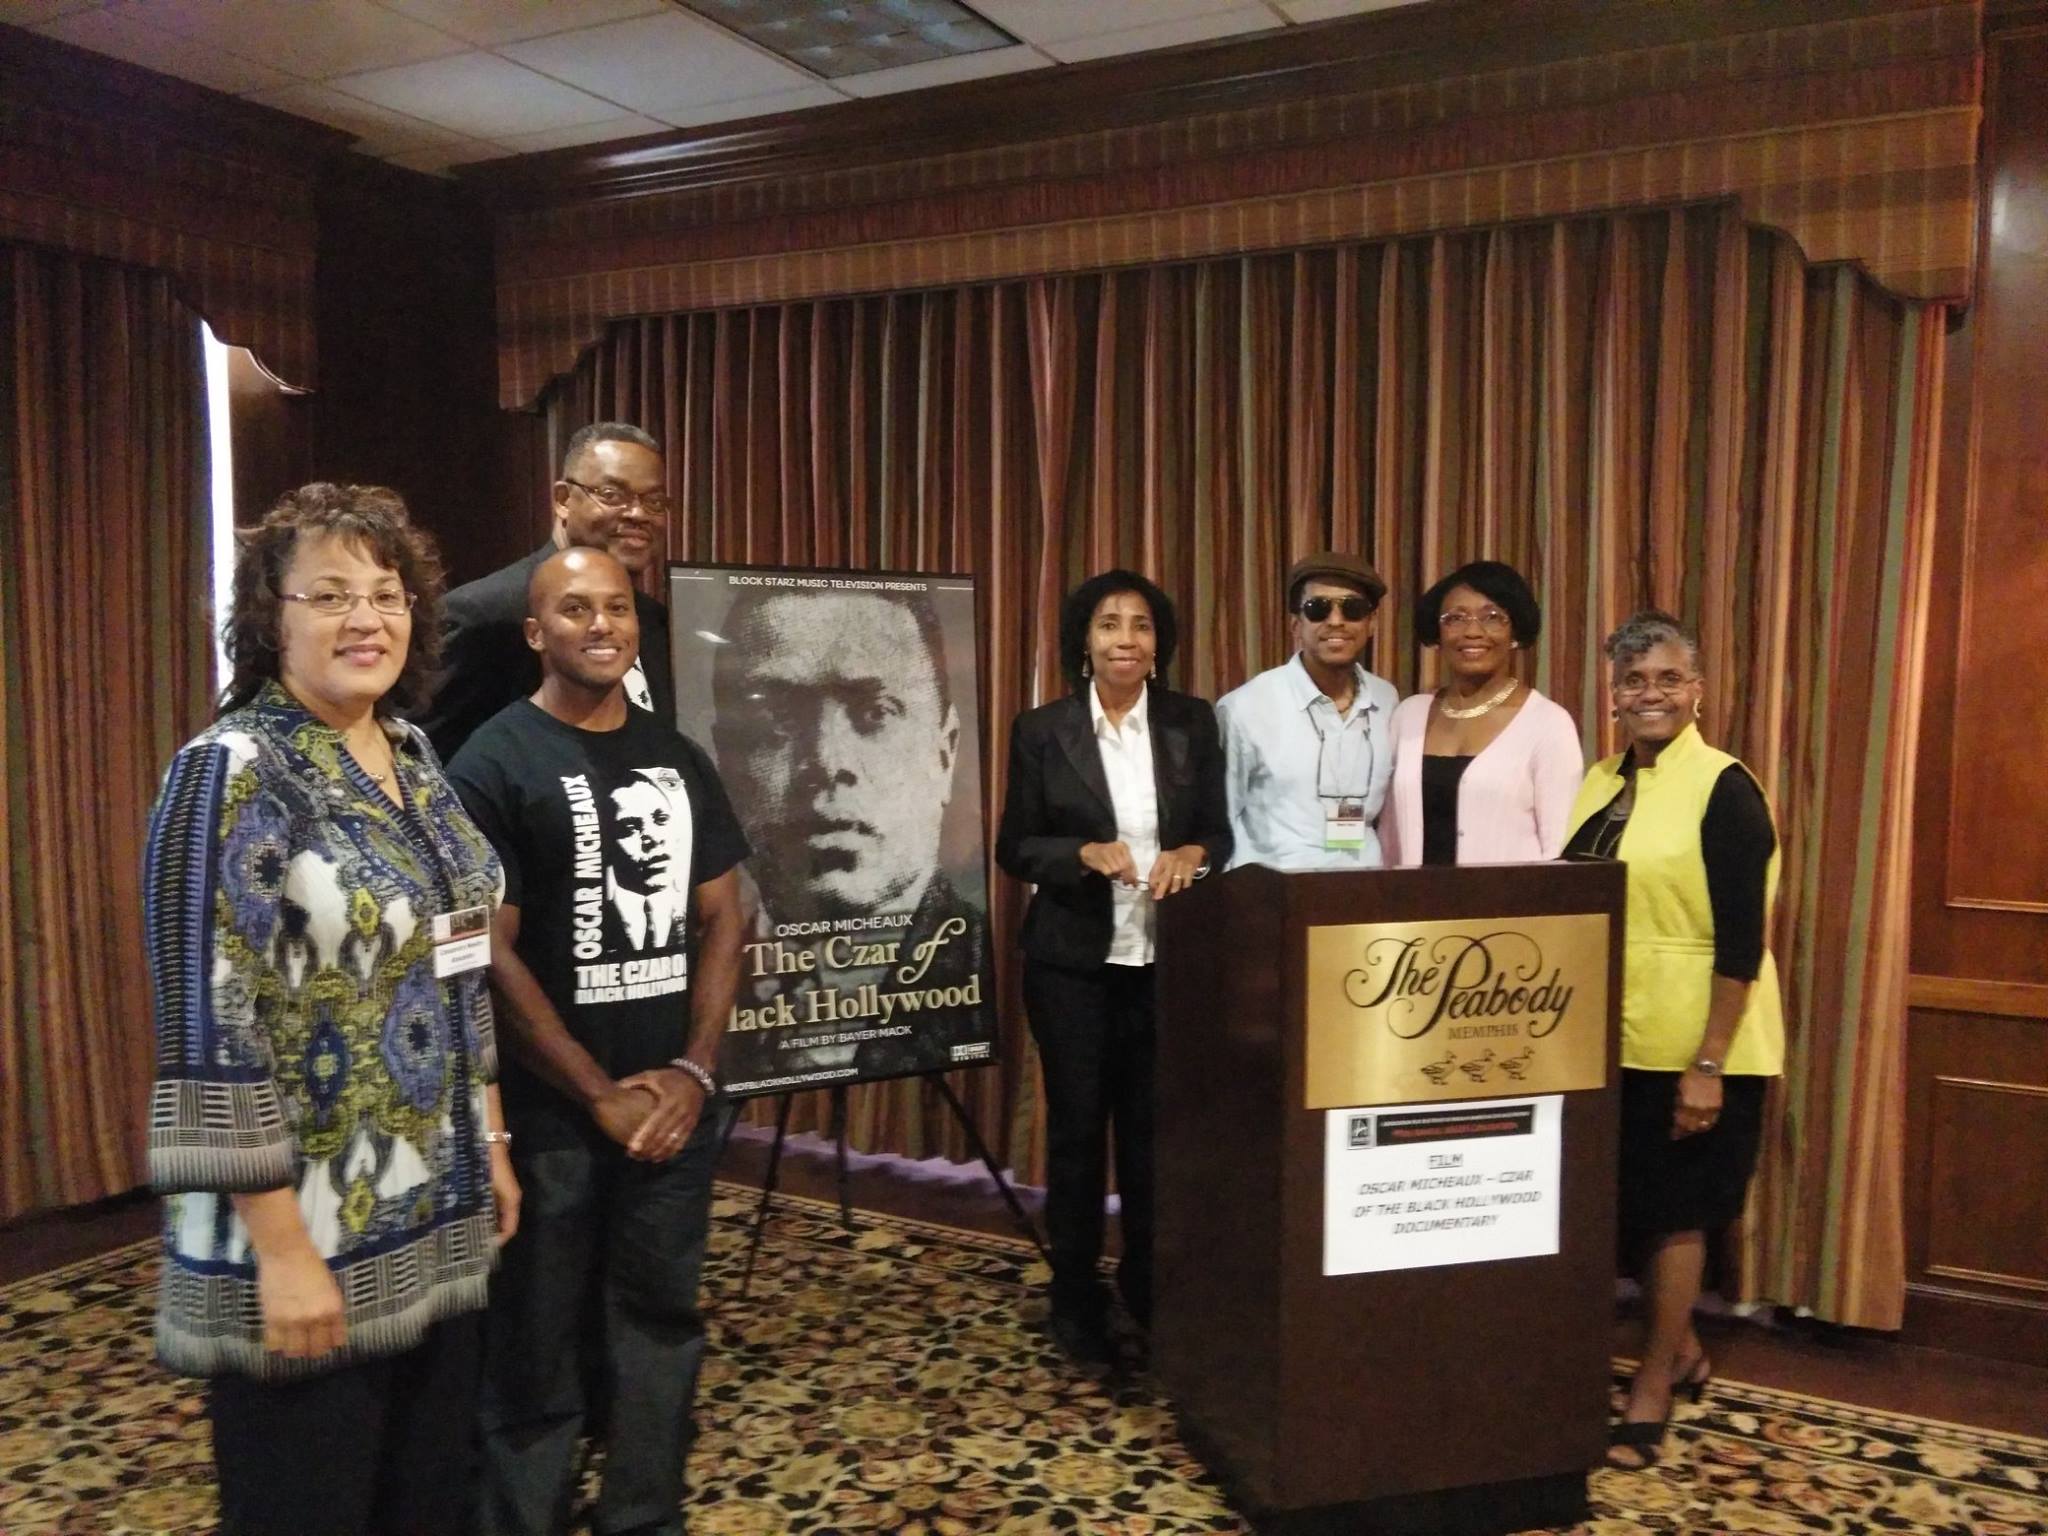 Oscar Micheaux: The Czar of Black Hollywood writer/director Bayer L. Mack at podium with executive producer Frances Presley Rice to his immediate left.